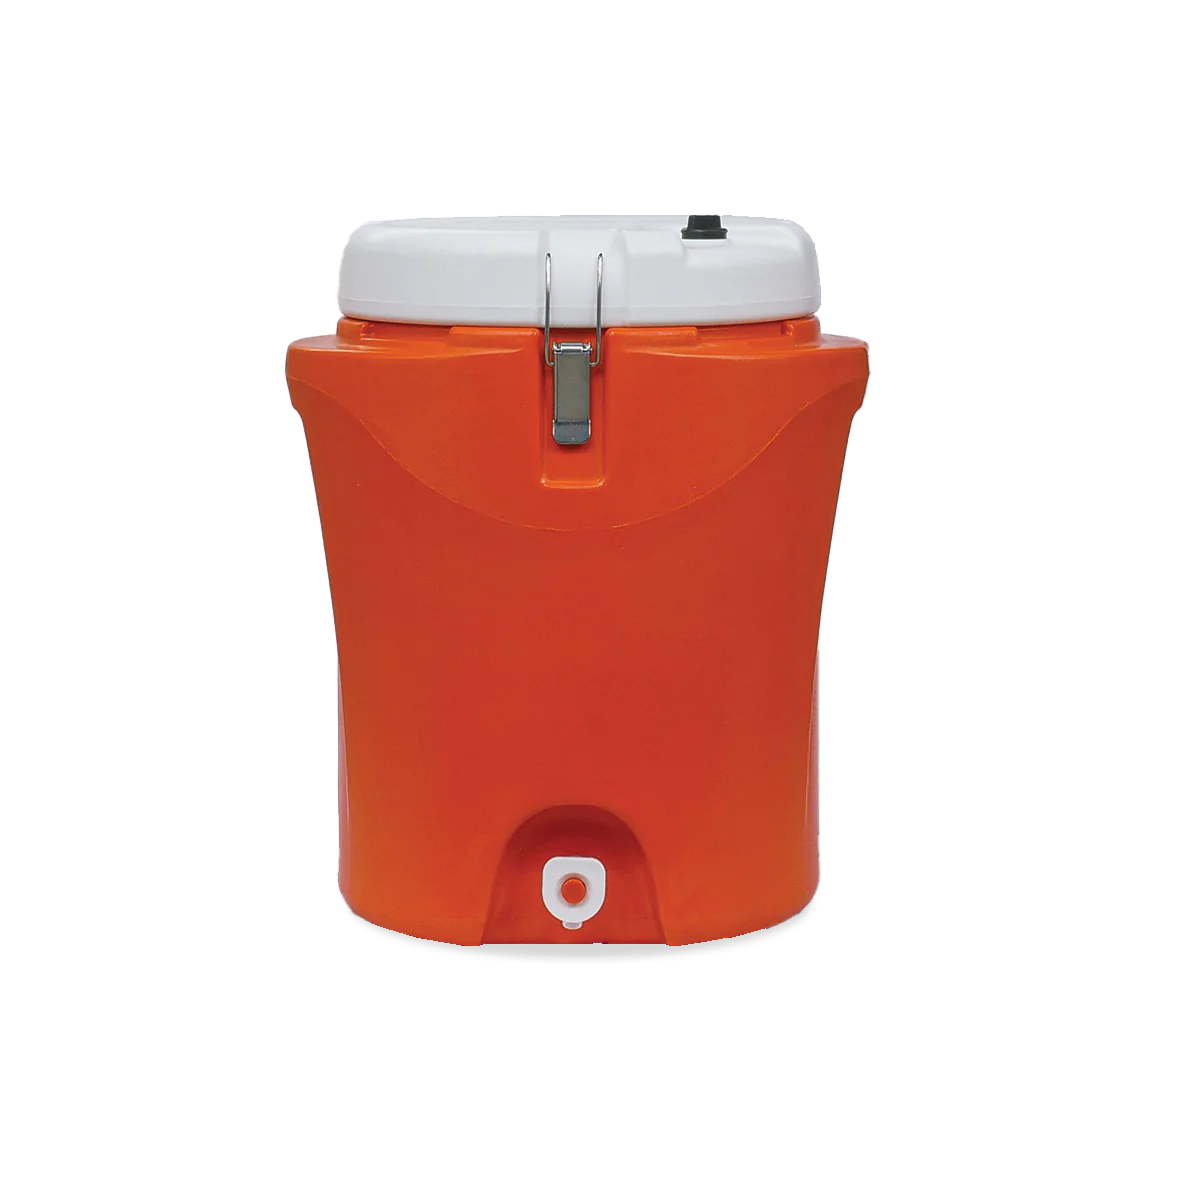 Featuring the 5 Gallon Watercooler cooler manufactured by Canyon shown here from a second angle.